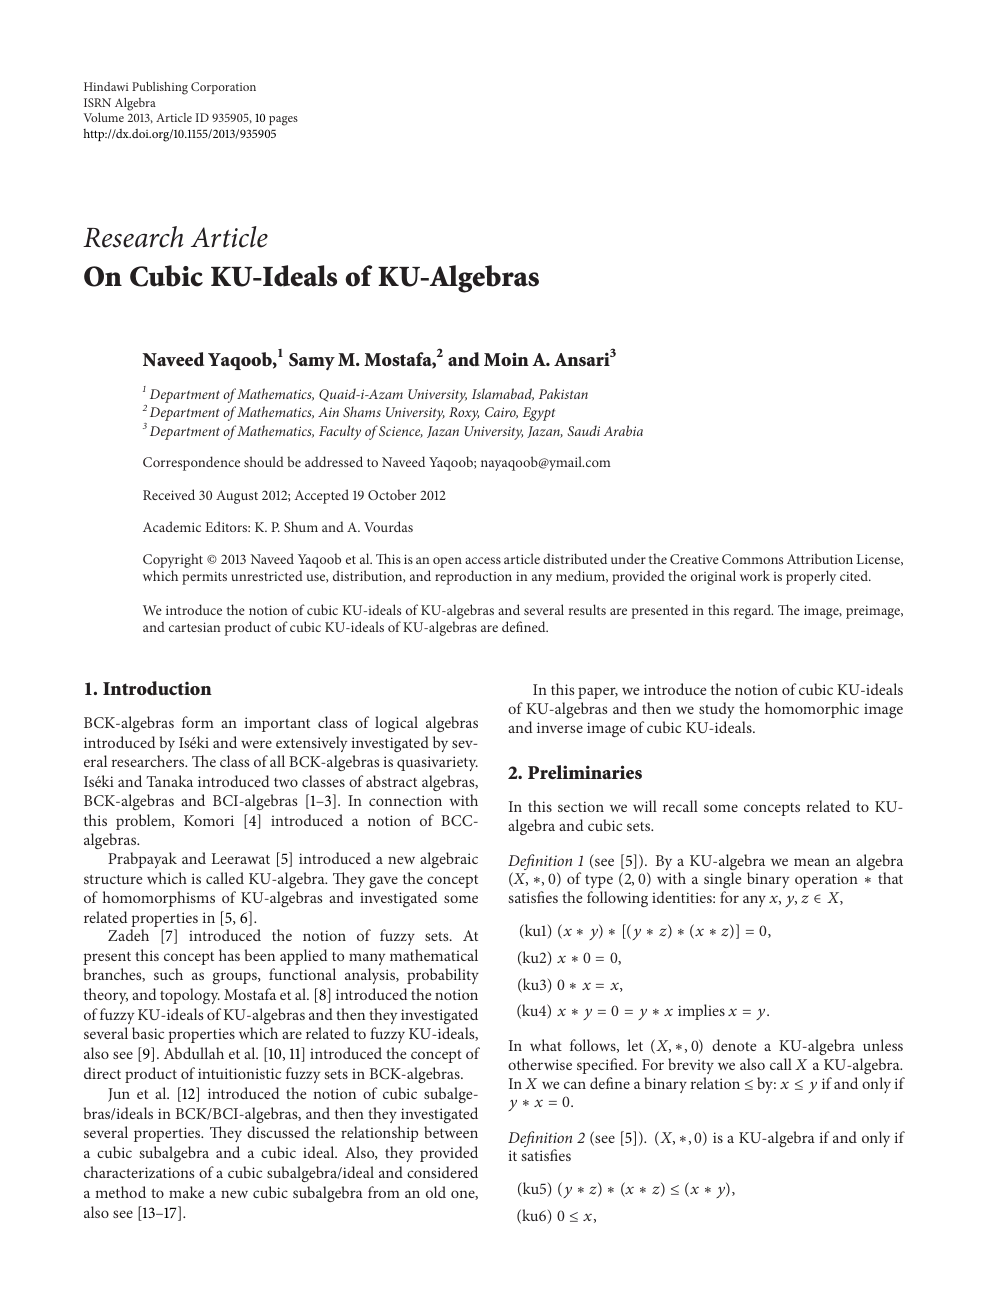 On Cubic Ku Ideals Of Ku Algebras Topic Of Research Paper In Mathematics Download Scholarly Article Pdf And Read For Free On Cyberleninka Open Science Hub